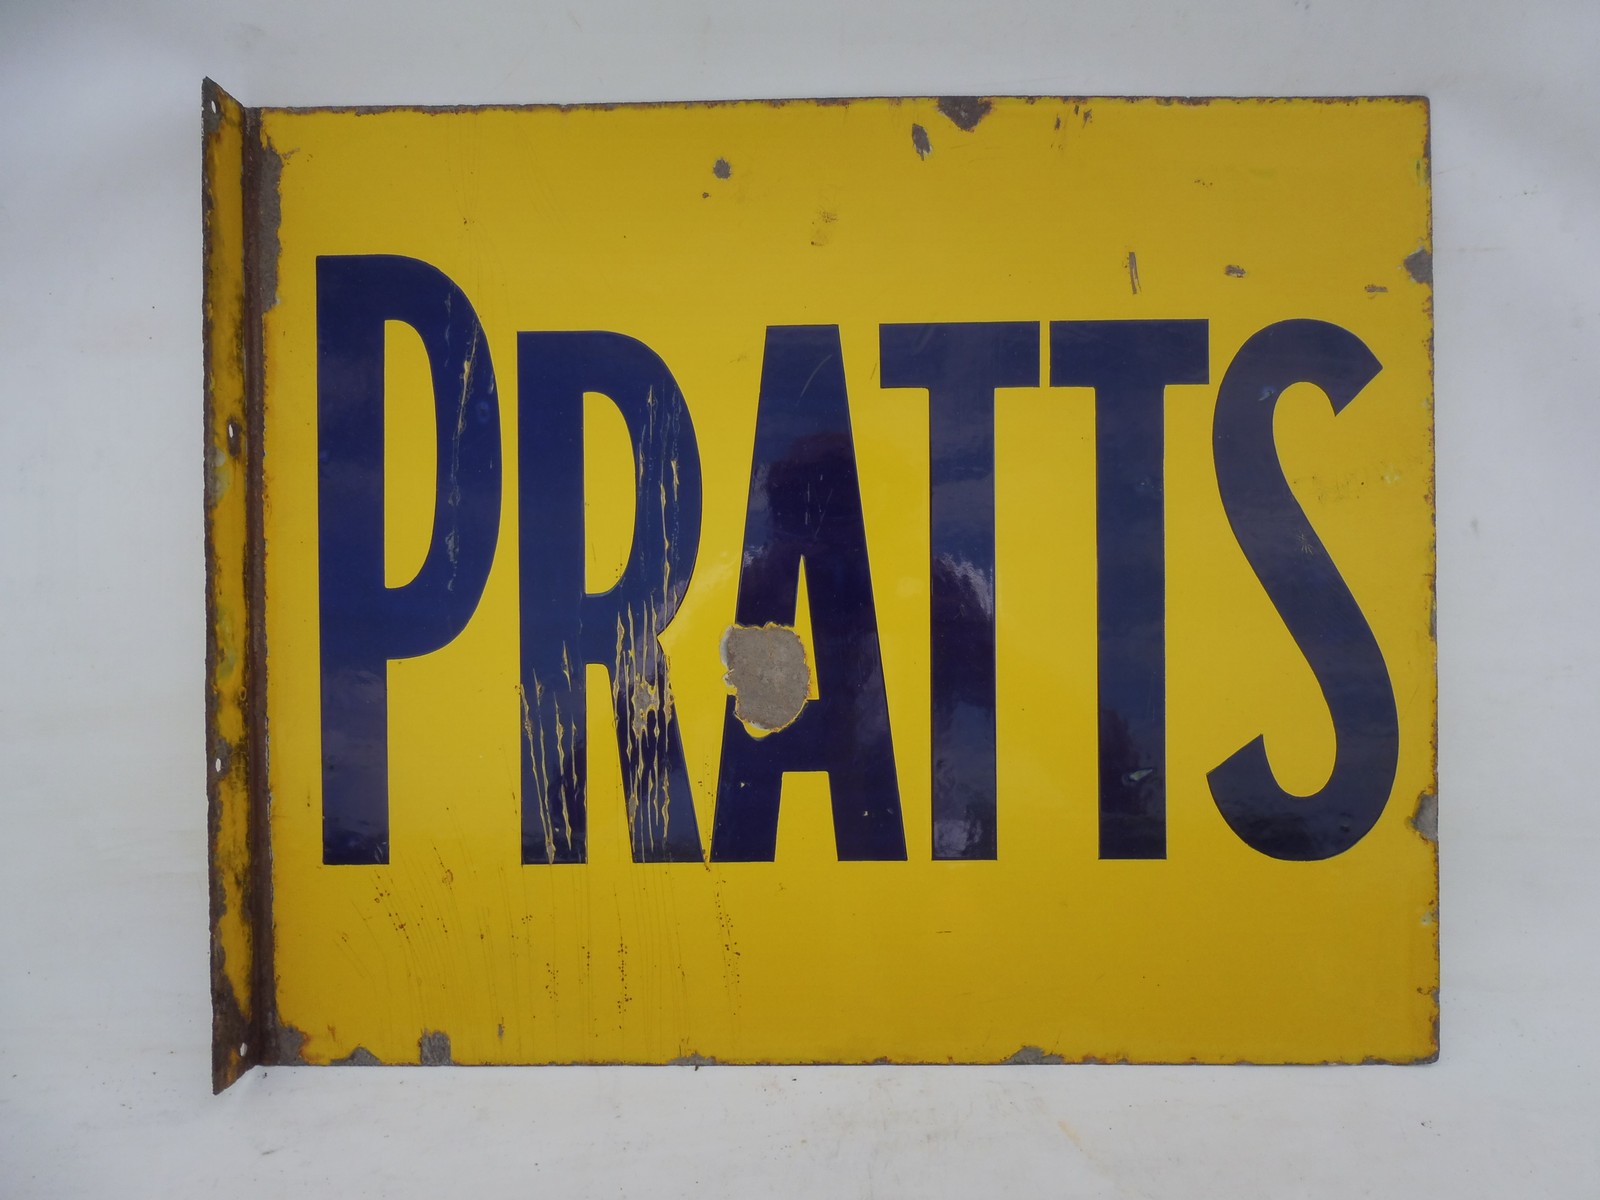 A Pratts double sided enamel sign with hanging flange, with good colour and gloss, 22 x 18".